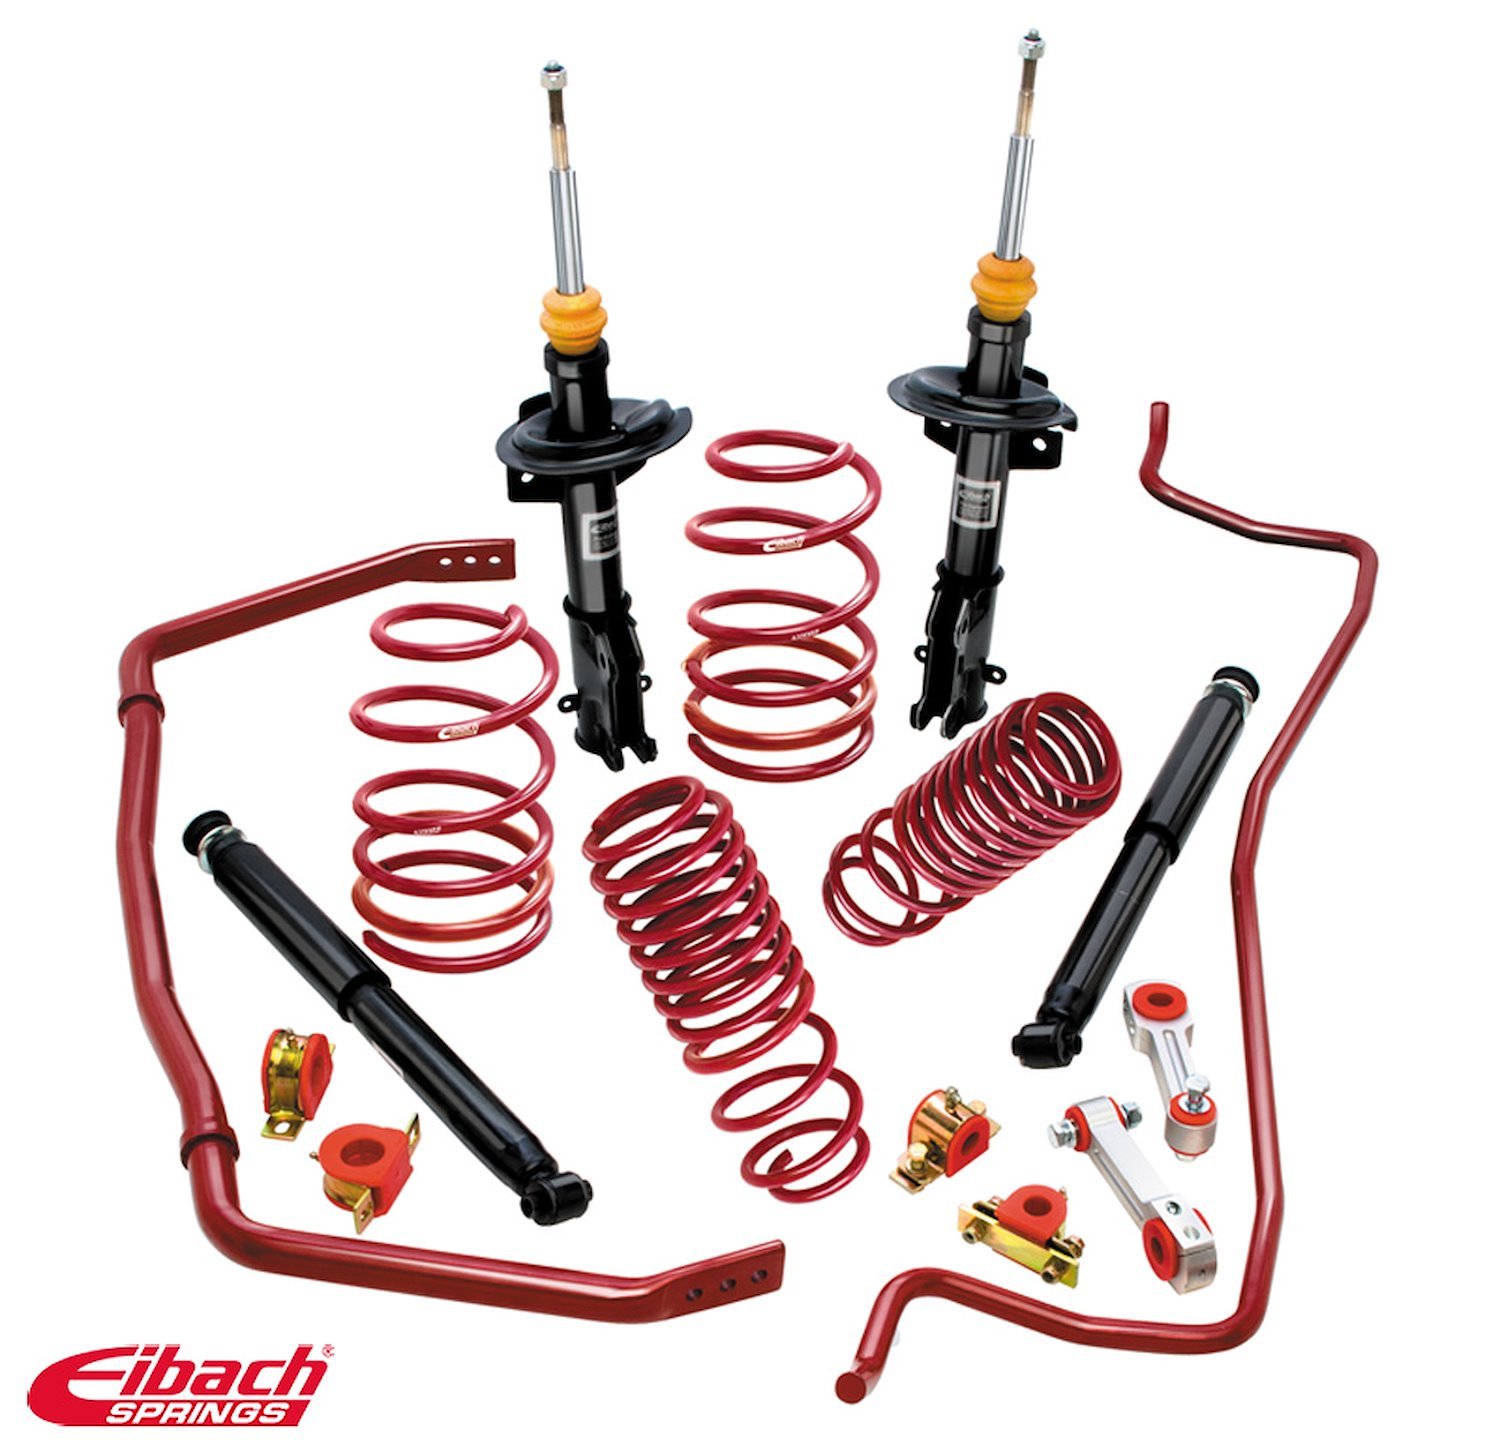 4.11535.680 Sport-System Plus Suspension System 2007-10 Mustang Shelby GT 500 coupe - 1.7" Front/2.2" Rear Drop